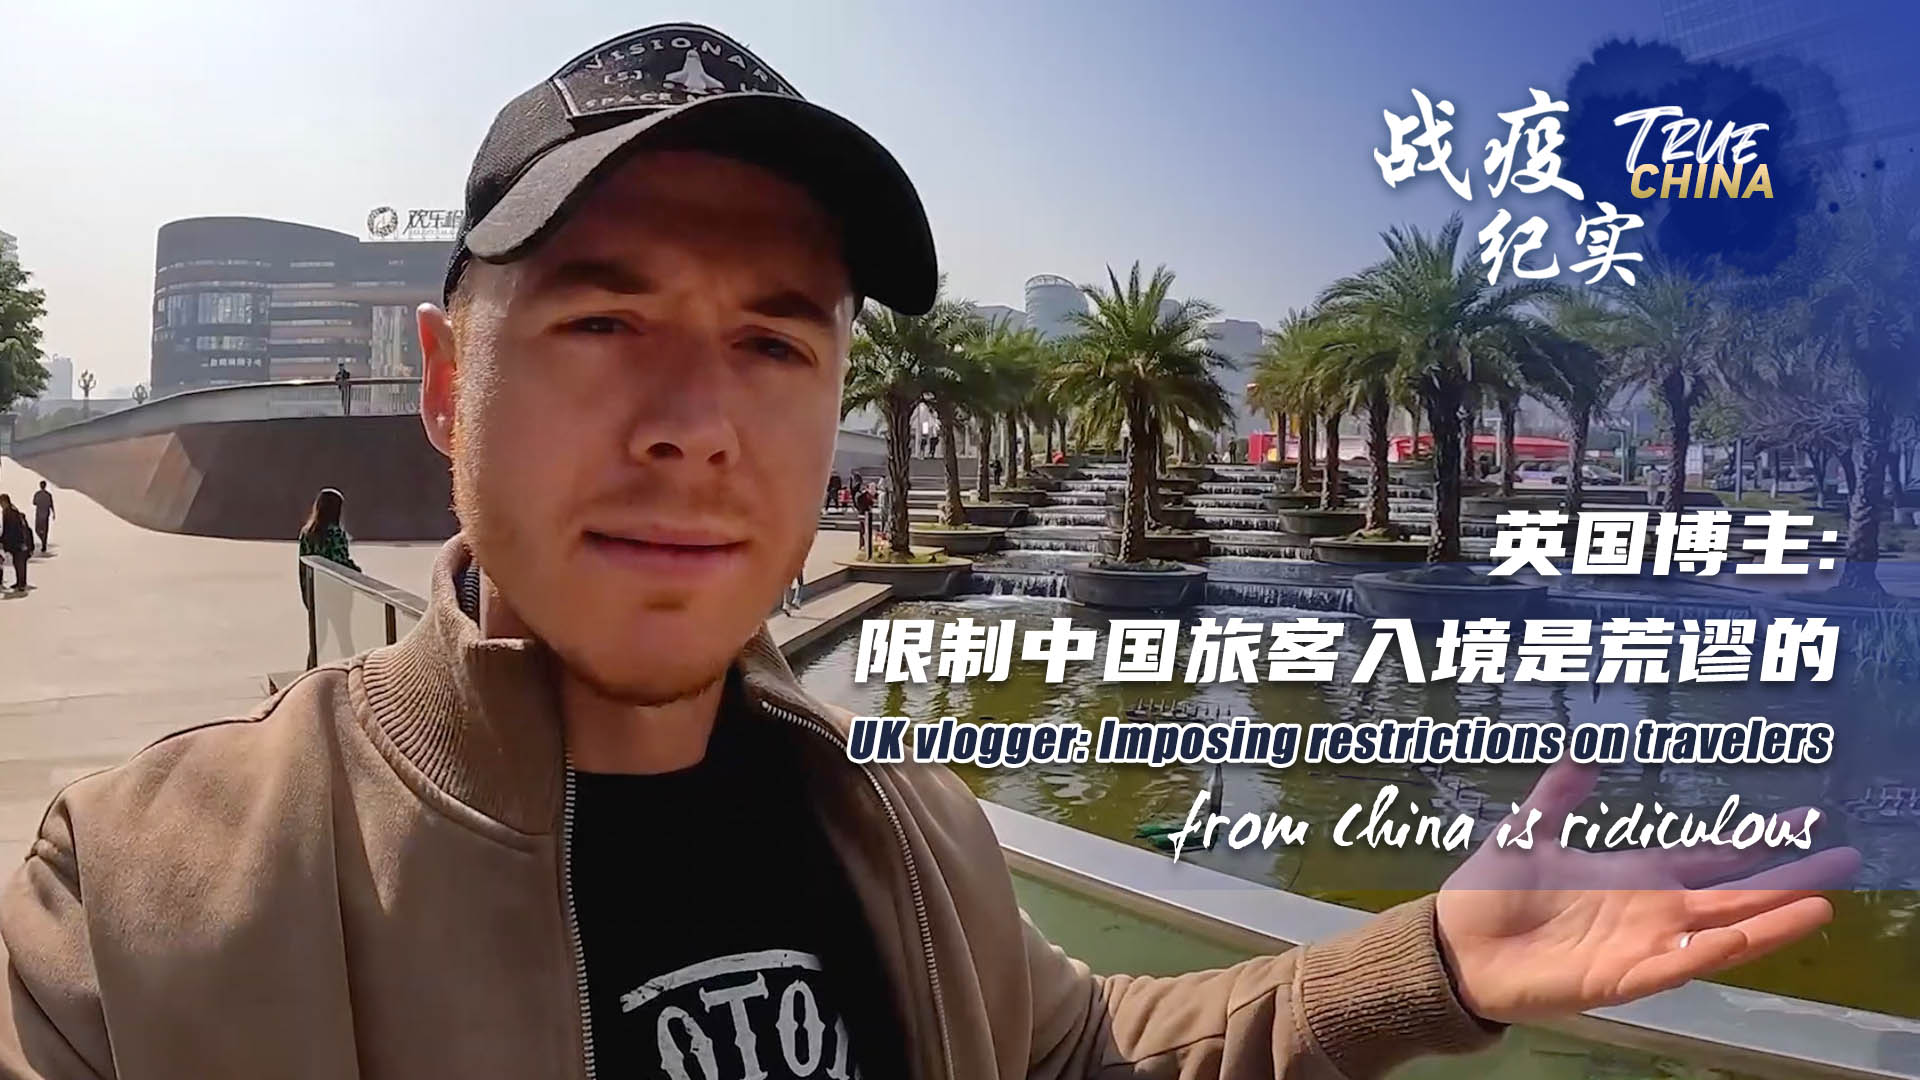 UK vlogger: Restrictions for travelers from China is ridiculous